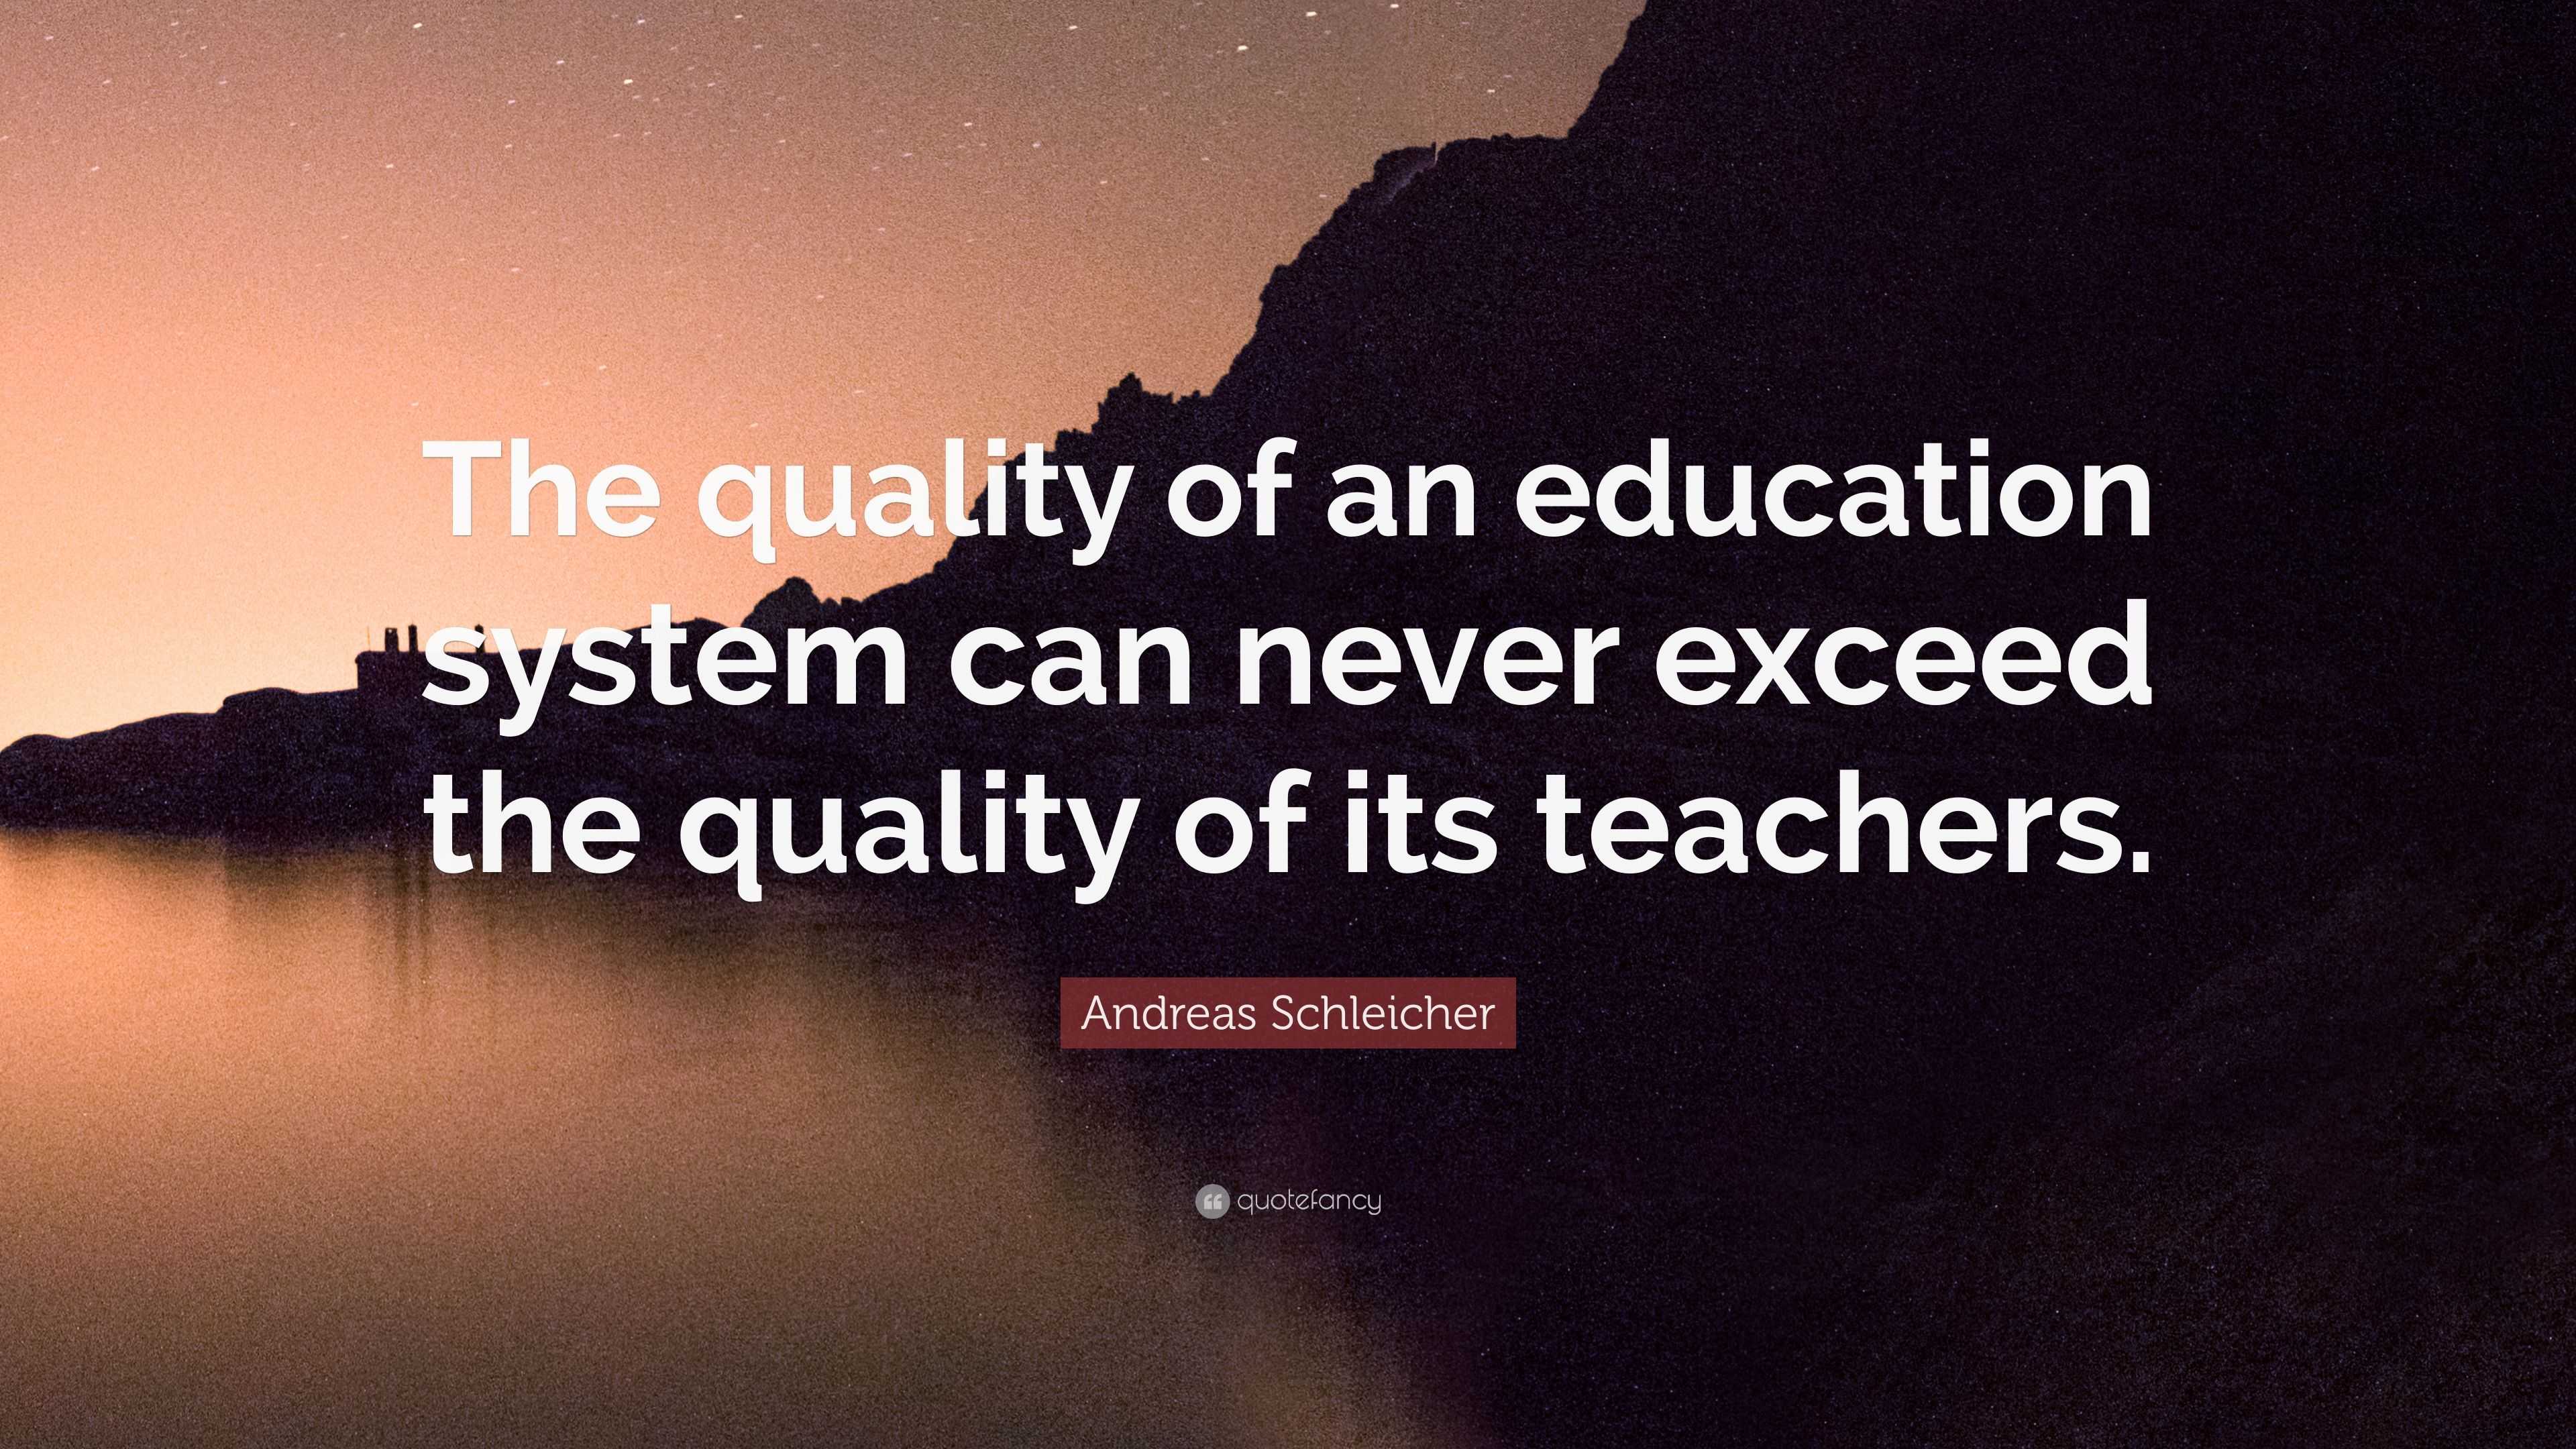 Famous Quotes About Education System